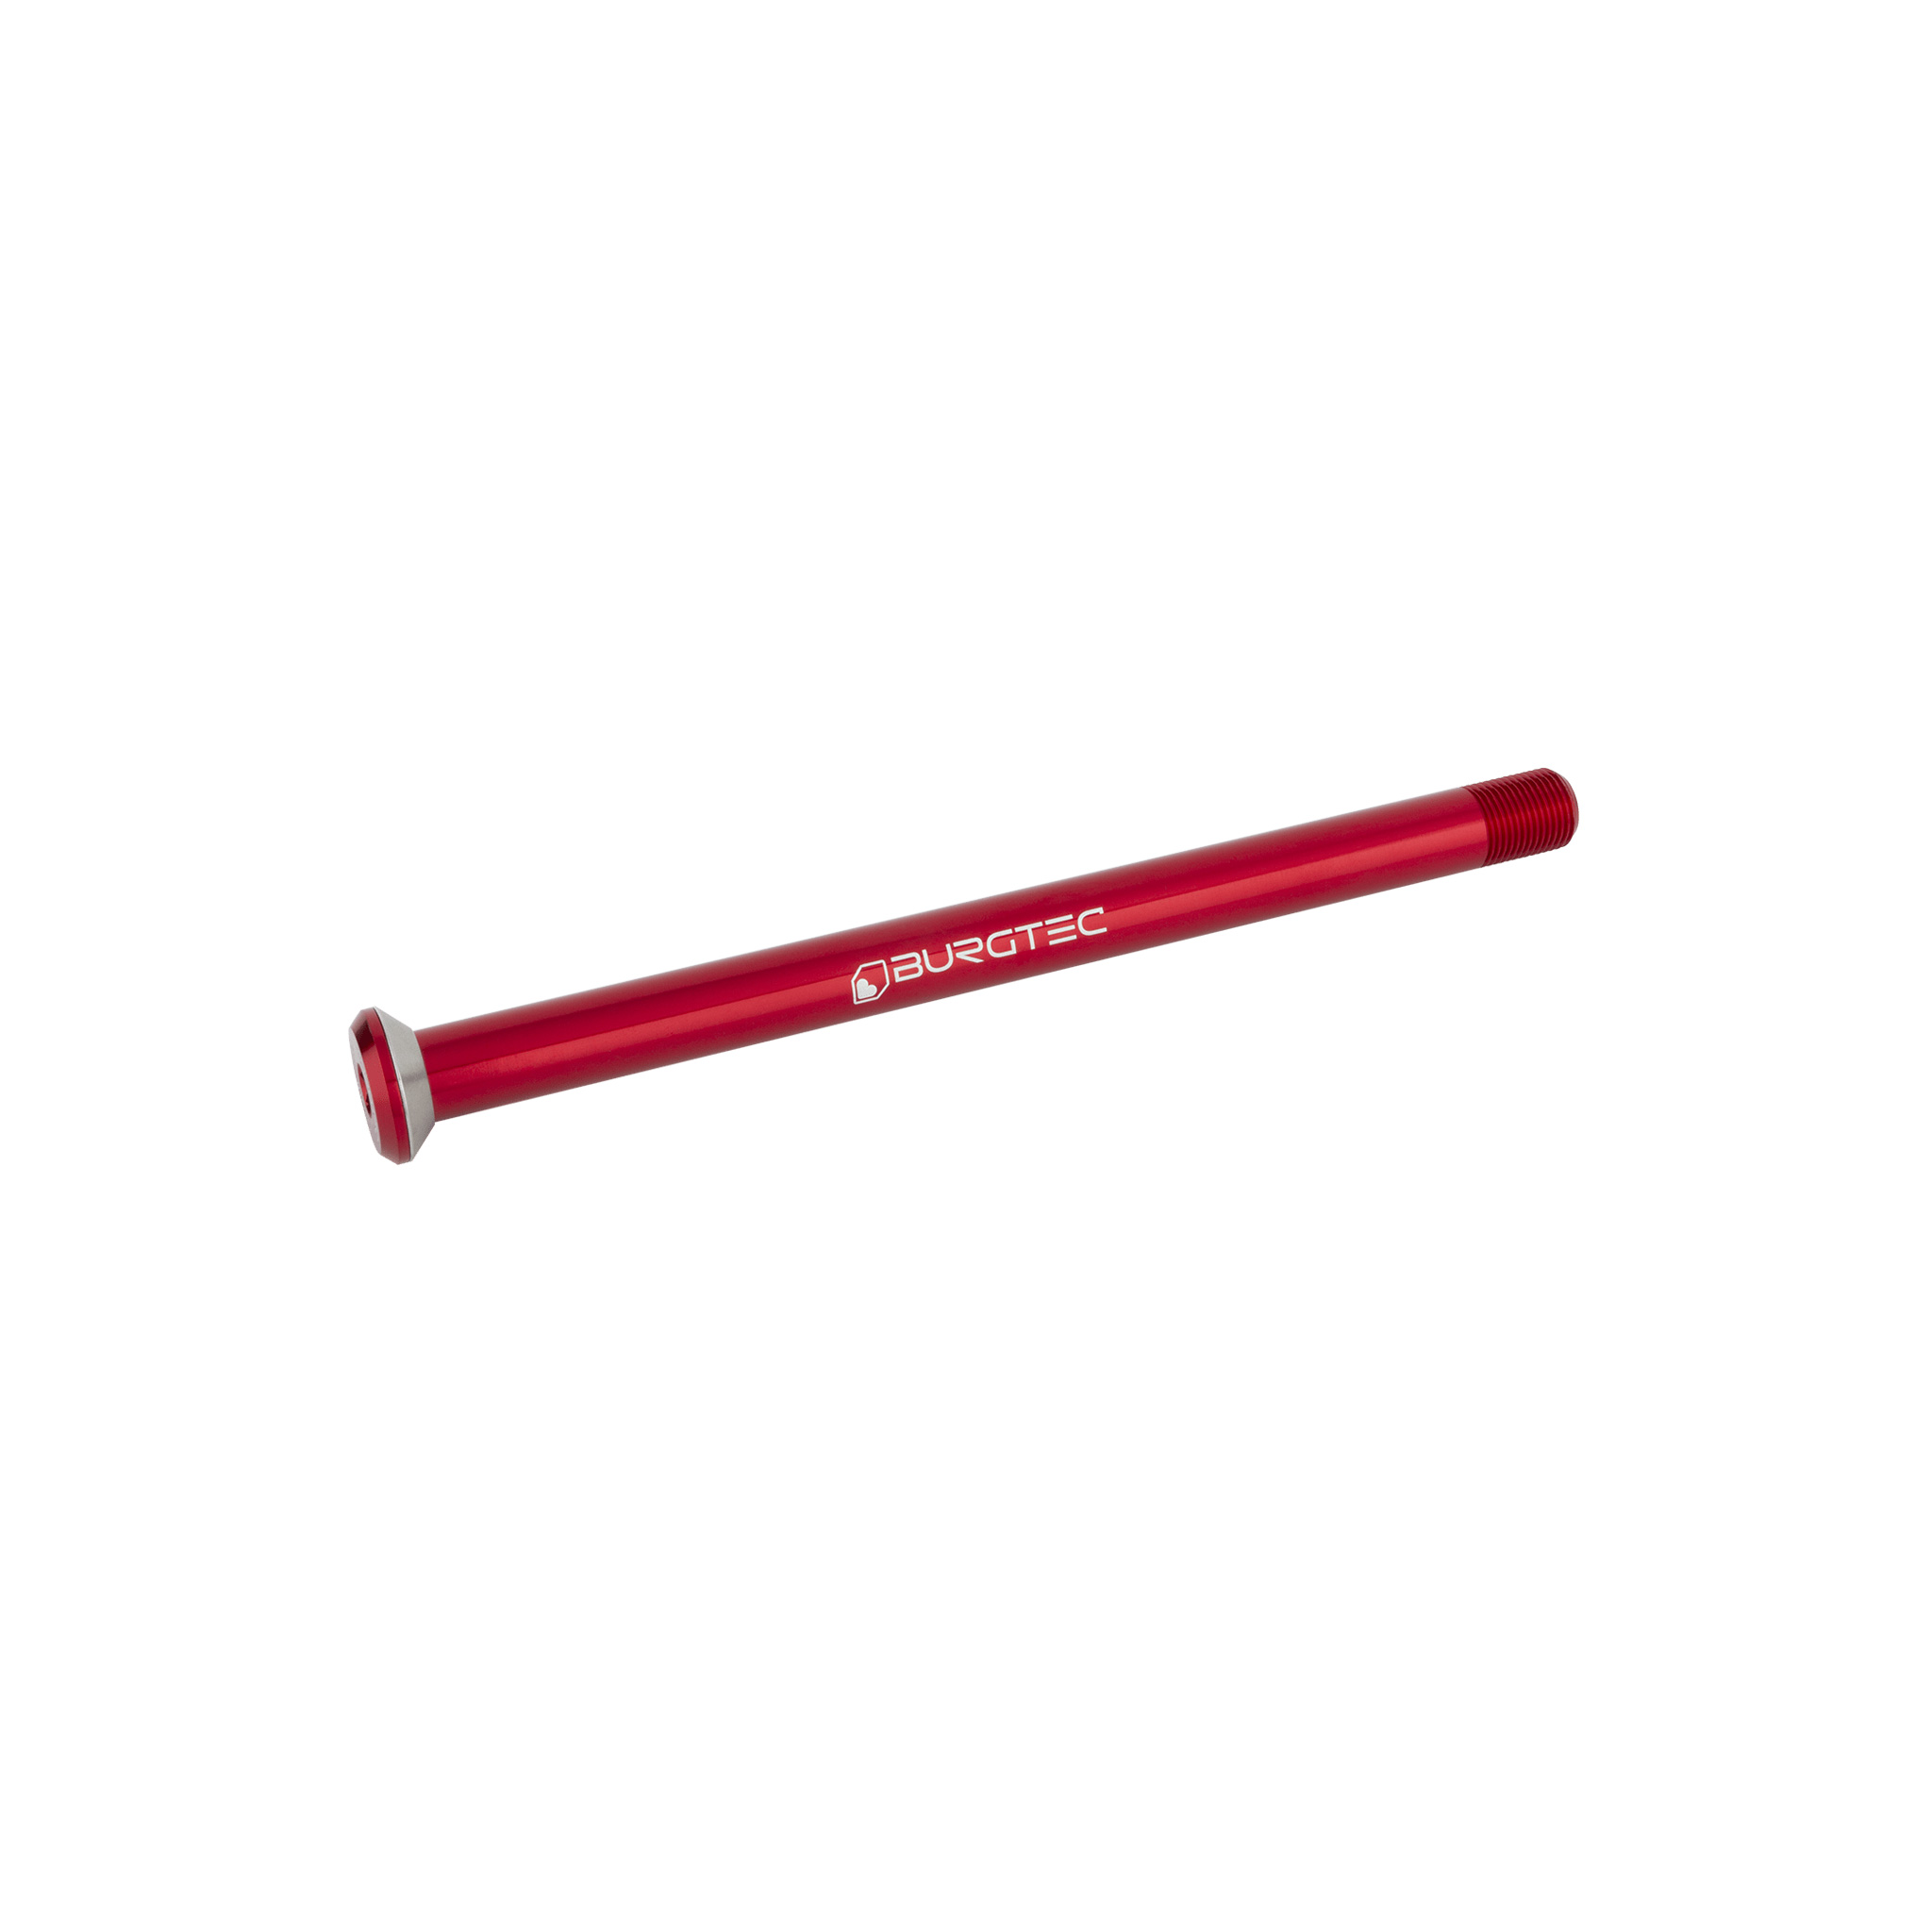 Burgtec Specialized 172mm Rear Axle, 12x1.0mm - Race Red